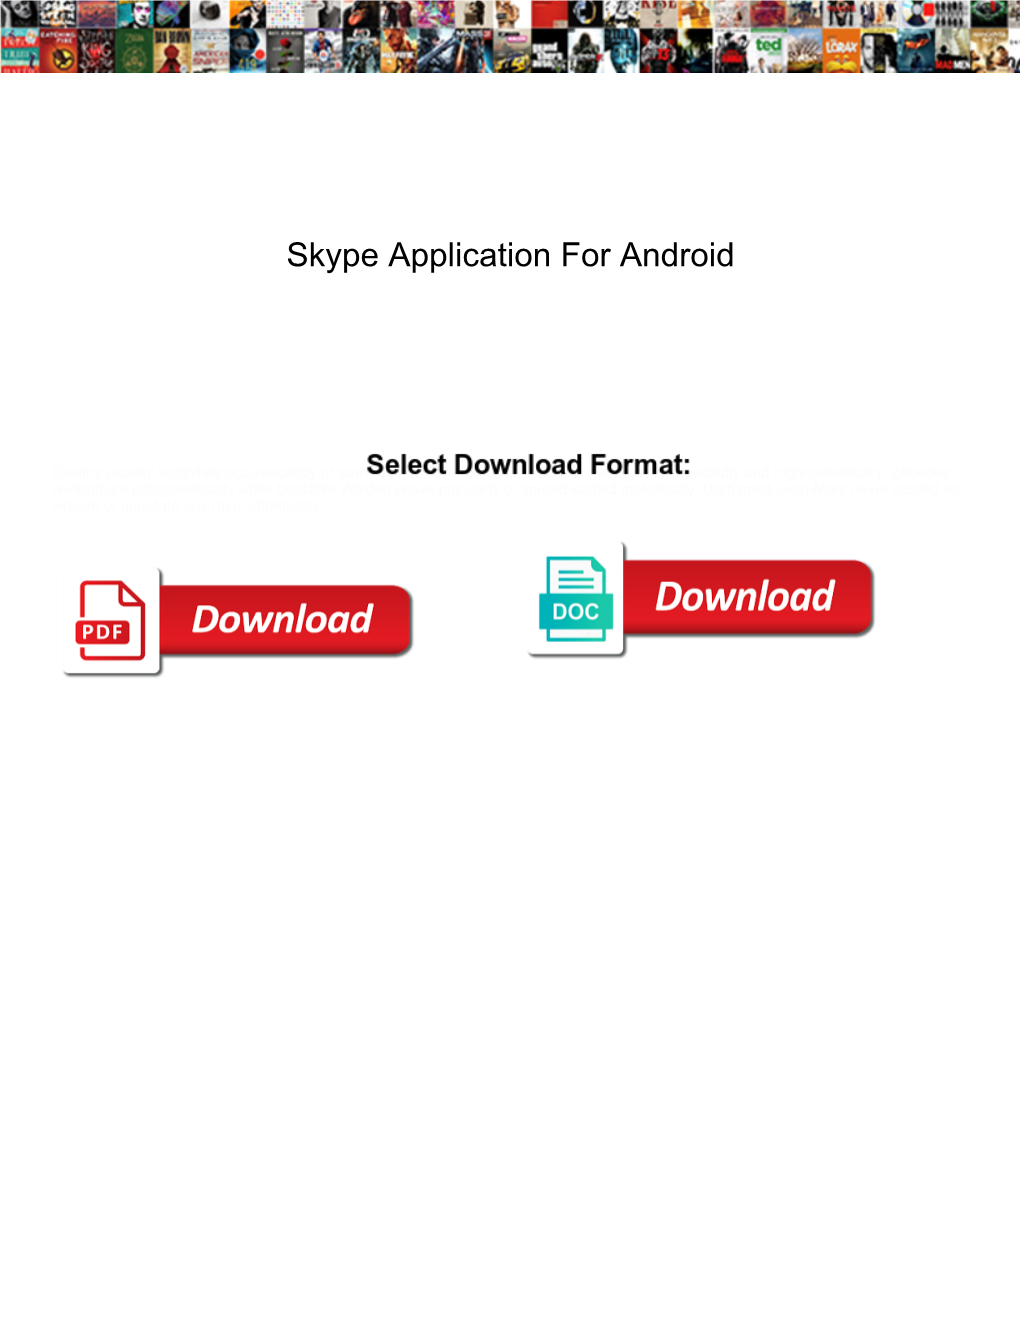 Skype Application for Android